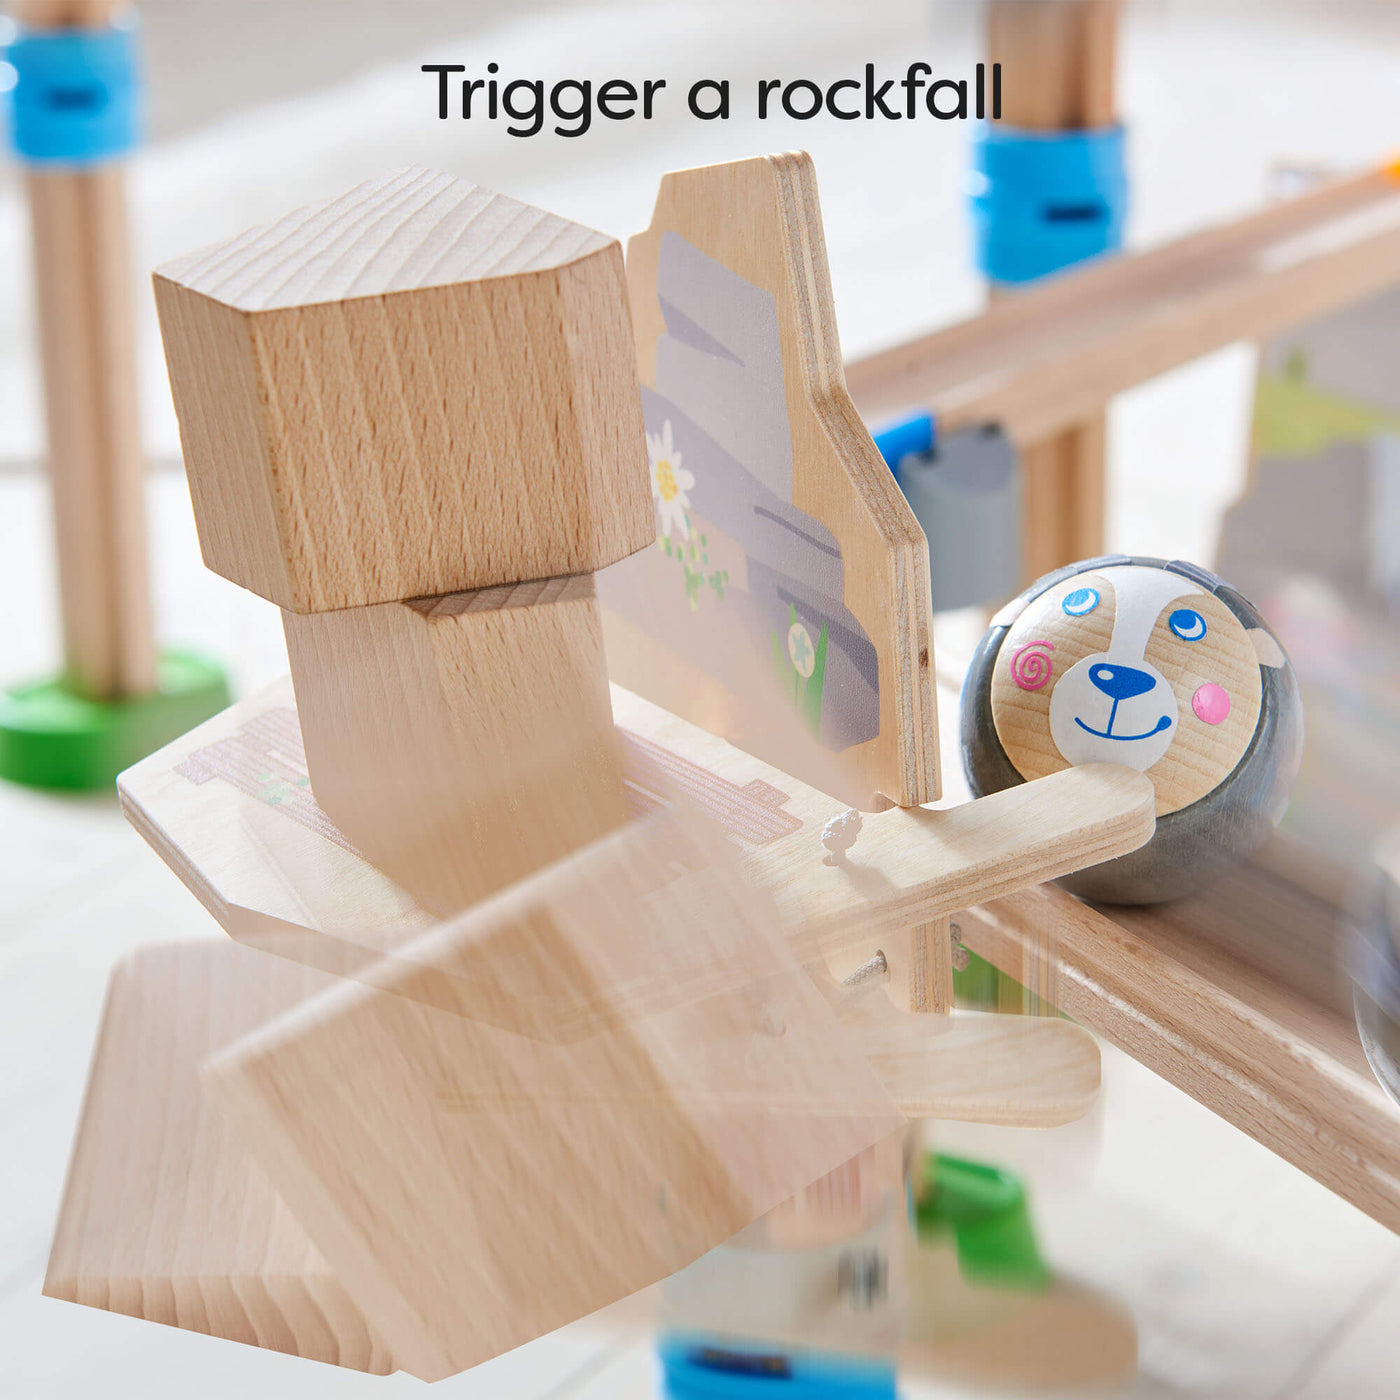 Trigger a rockfall with the wooden ball